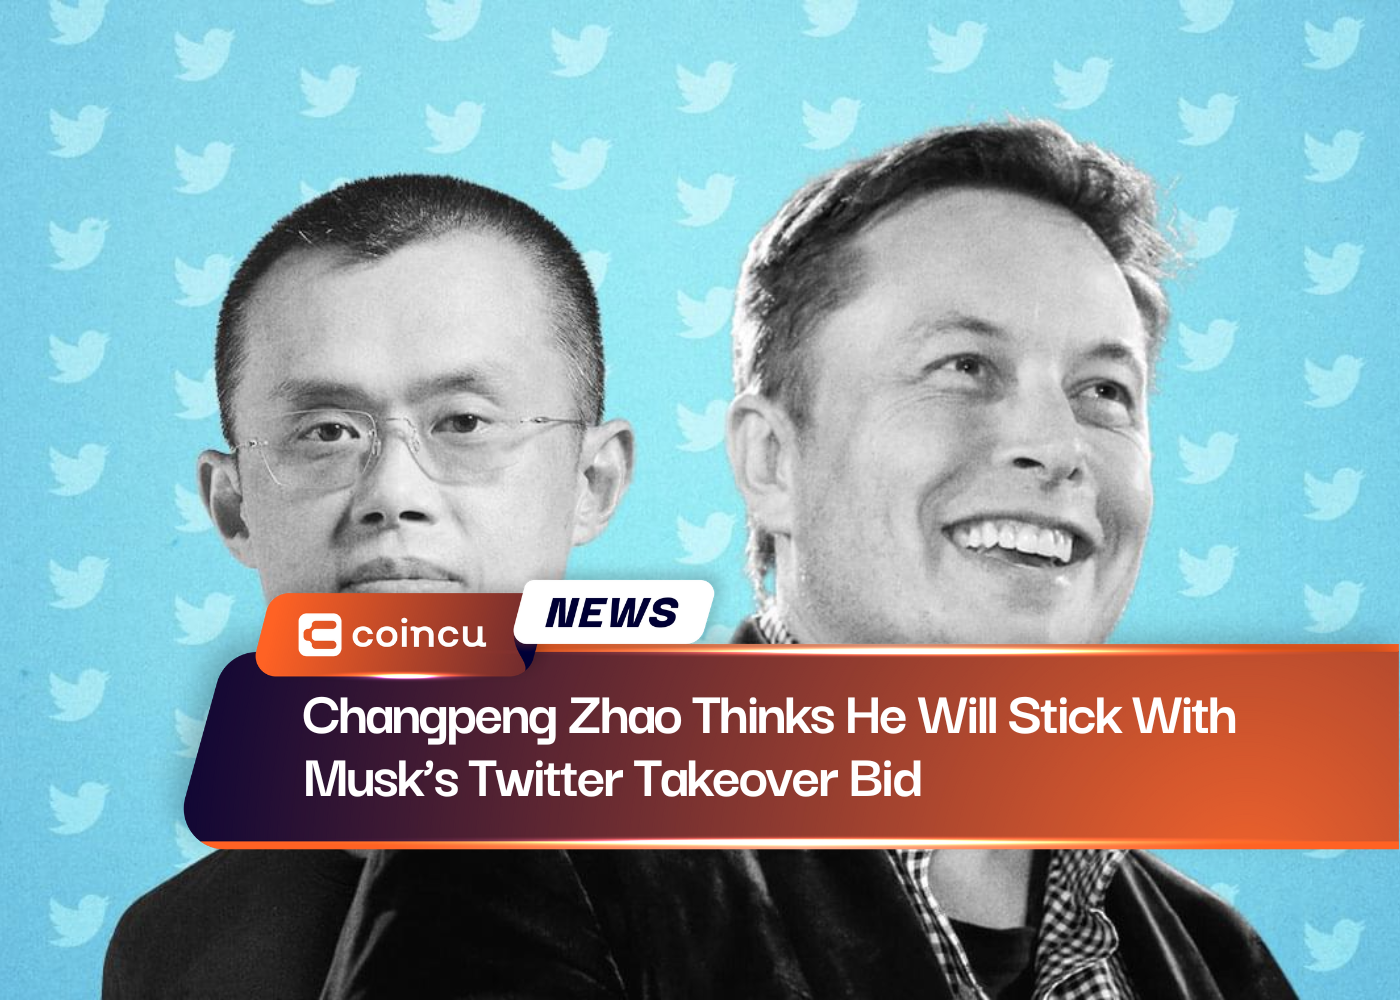 Changpeng Zhao Thinks He Will Stick With Musk’s Twitter Takeover Bid